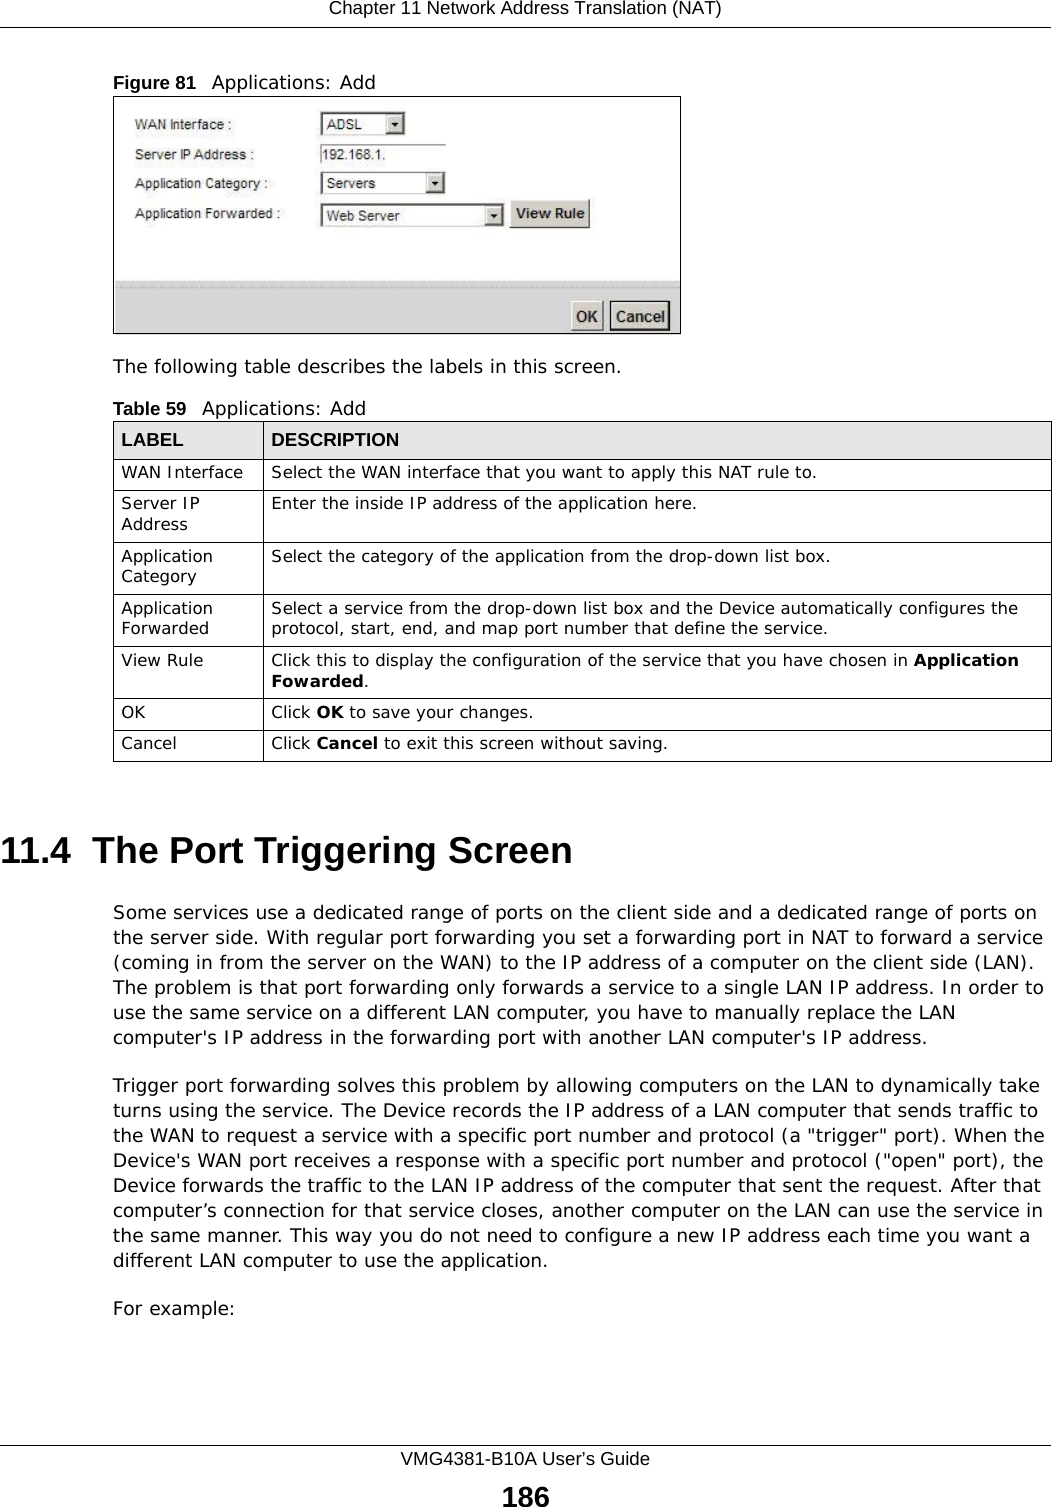 Chapter 11 Network Address Translation (NAT)VMG4381-B10A User’s Guide186Figure 81   Applications: Add The following table describes the labels in this screen. 11.4  The Port Triggering ScreenSome services use a dedicated range of ports on the client side and a dedicated range of ports on the server side. With regular port forwarding you set a forwarding port in NAT to forward a service (coming in from the server on the WAN) to the IP address of a computer on the client side (LAN). The problem is that port forwarding only forwards a service to a single LAN IP address. In order to use the same service on a different LAN computer, you have to manually replace the LAN computer&apos;s IP address in the forwarding port with another LAN computer&apos;s IP address. Trigger port forwarding solves this problem by allowing computers on the LAN to dynamically take turns using the service. The Device records the IP address of a LAN computer that sends traffic to the WAN to request a service with a specific port number and protocol (a &quot;trigger&quot; port). When the Device&apos;s WAN port receives a response with a specific port number and protocol (&quot;open&quot; port), the Device forwards the traffic to the LAN IP address of the computer that sent the request. After that computer’s connection for that service closes, another computer on the LAN can use the service in the same manner. This way you do not need to configure a new IP address each time you want a different LAN computer to use the application.For example:Table 59   Applications: AddLABEL DESCRIPTIONWAN Interface Select the WAN interface that you want to apply this NAT rule to.Server IP Address Enter the inside IP address of the application here.Application Category Select the category of the application from the drop-down list box.Application Forwarded Select a service from the drop-down list box and the Device automatically configures the protocol, start, end, and map port number that define the service.View Rule Click this to display the configuration of the service that you have chosen in Application Fowarded.OK Click OK to save your changes.Cancel Click Cancel to exit this screen without saving.